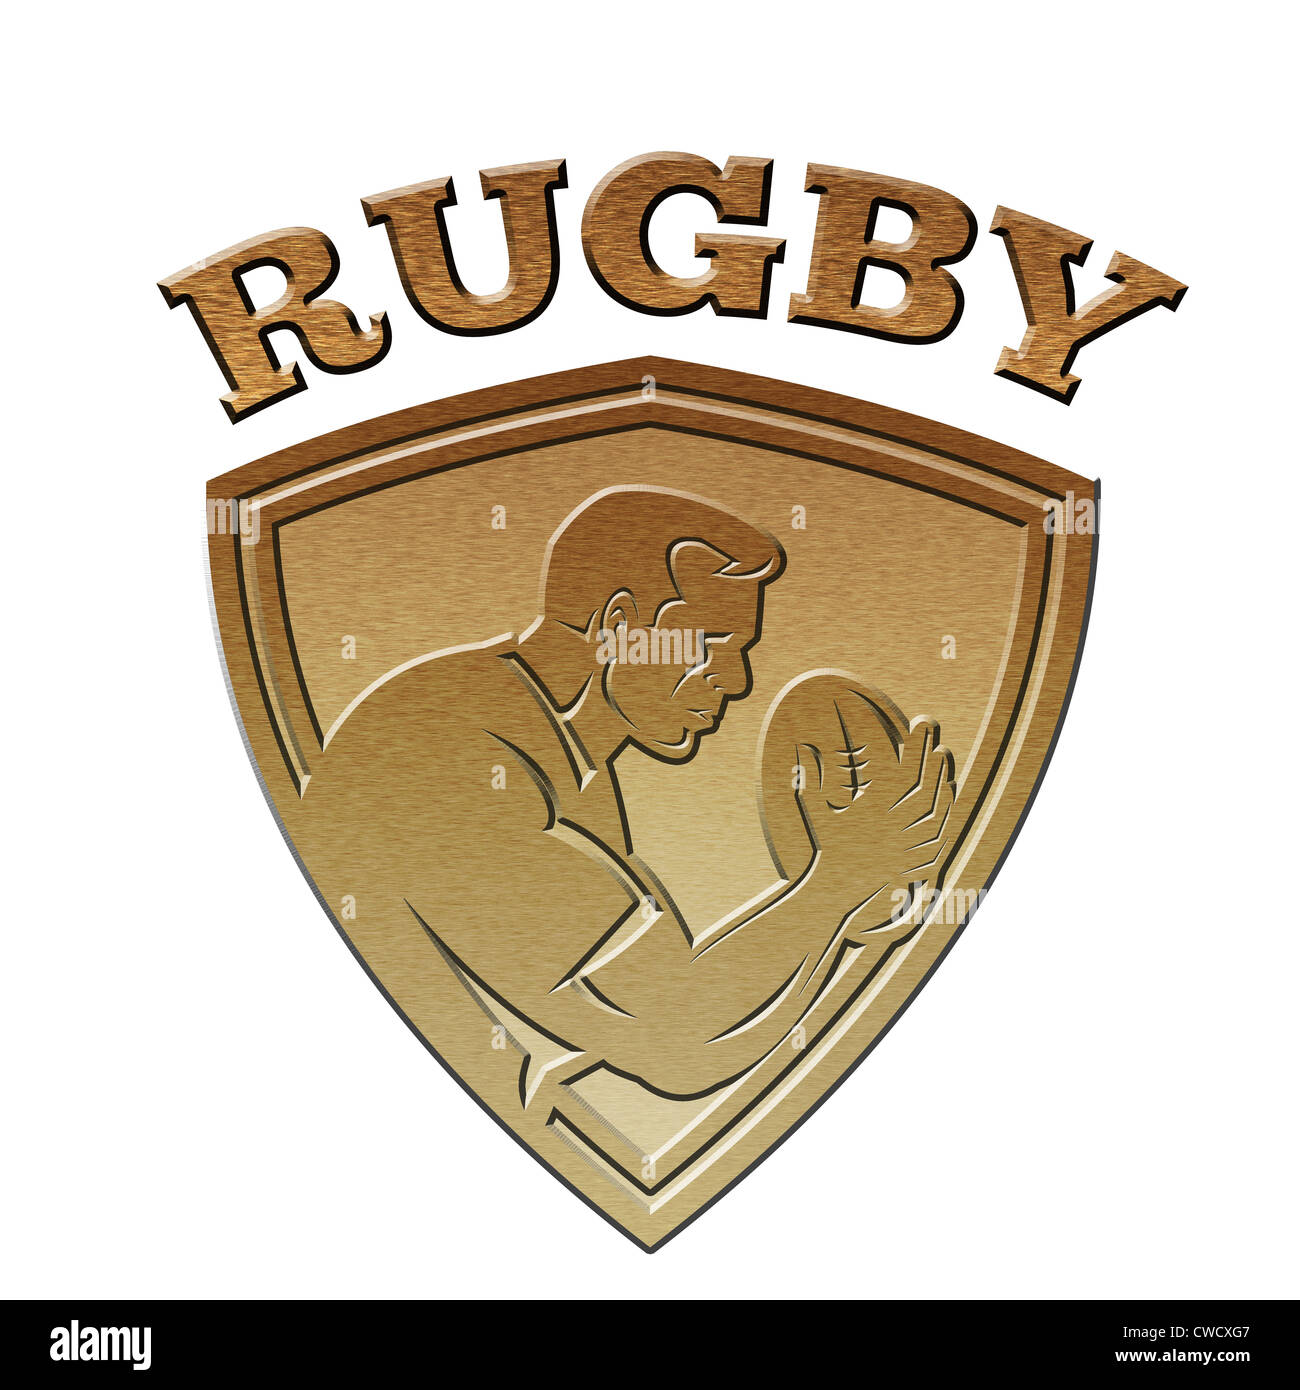 illustration of a rugby player running passing the ball on isolated background done in metallic gold style set inside shield Stock Photo